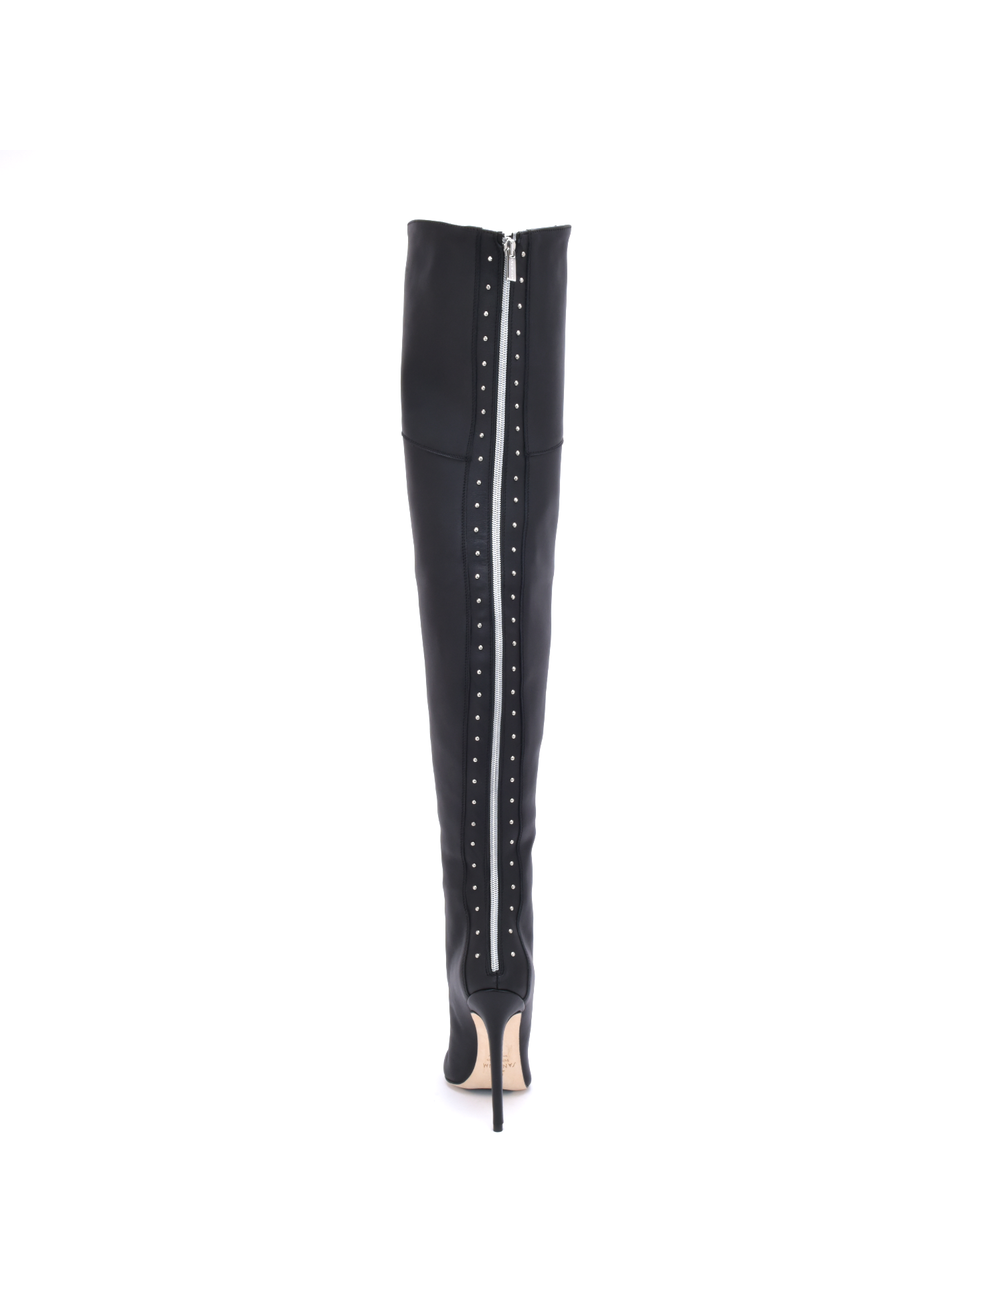 Sanctum 132-OULET Sanctum MANOUK THIGH BOOTS BLACK NAPPA with STUDS and made of CALF LEATHER